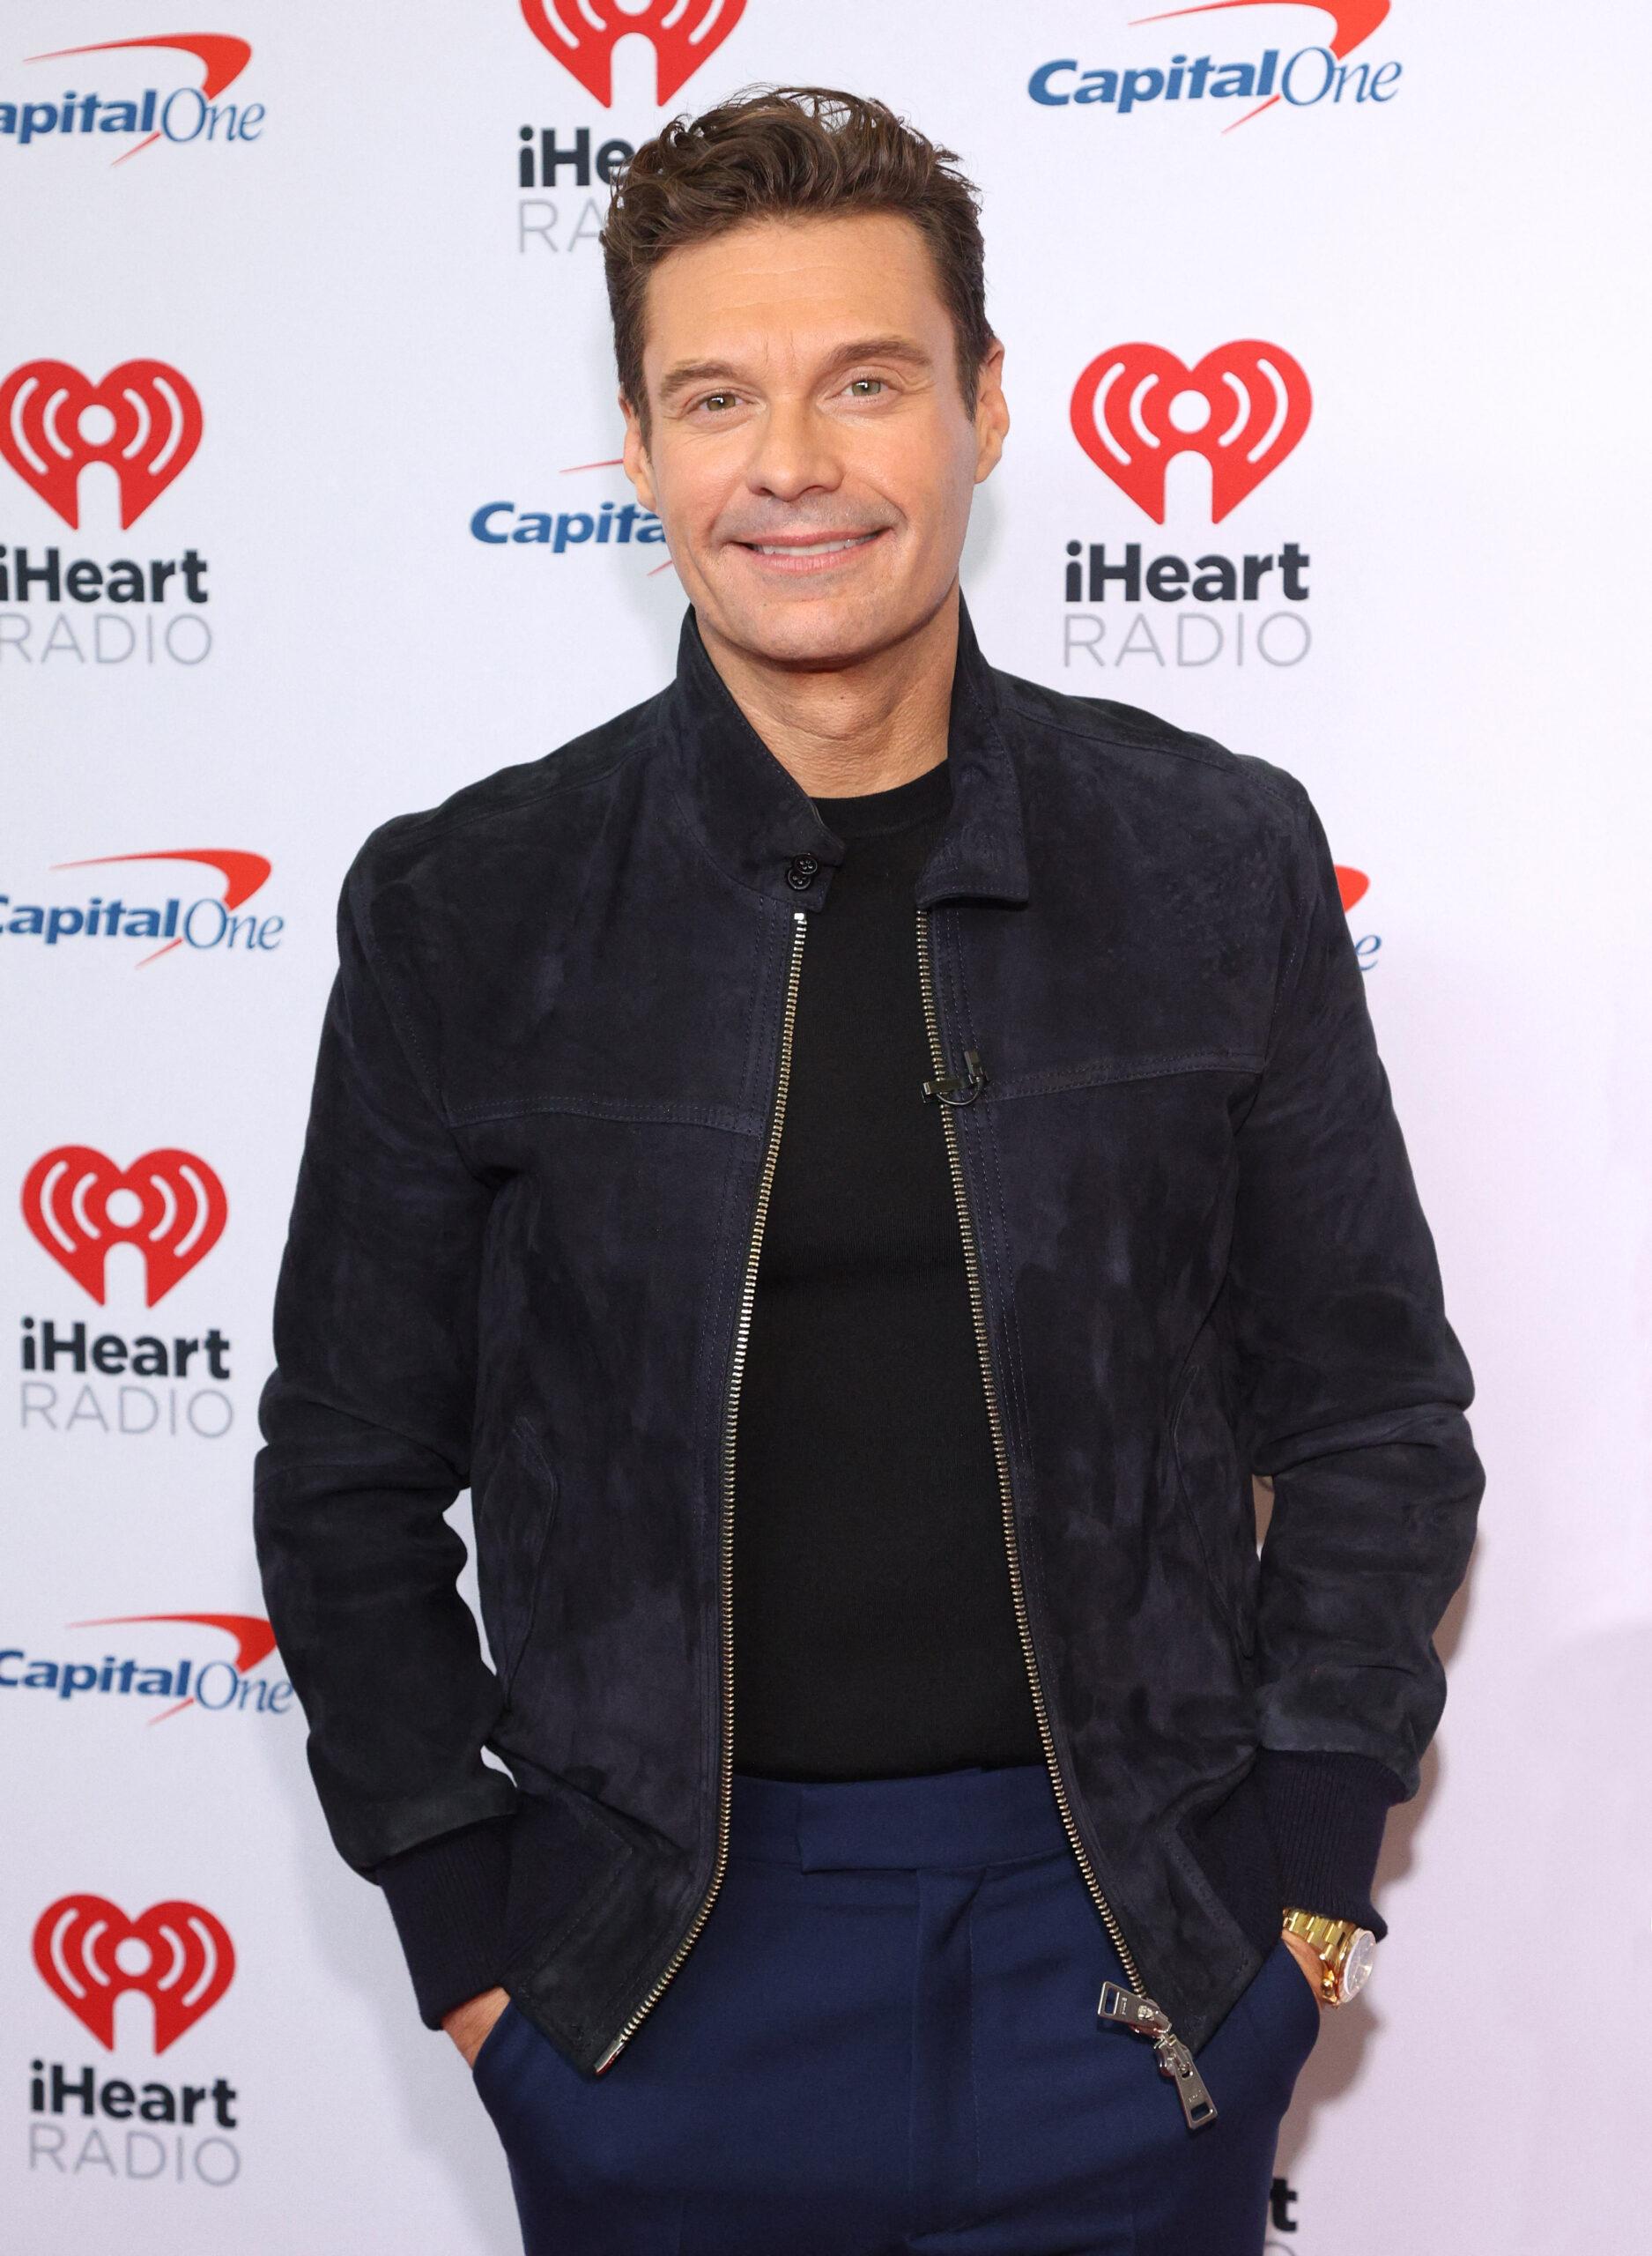 Ryan Seacrest says he's hosting 'Wheel Of Fortune' because Pat Sajak's days are limited